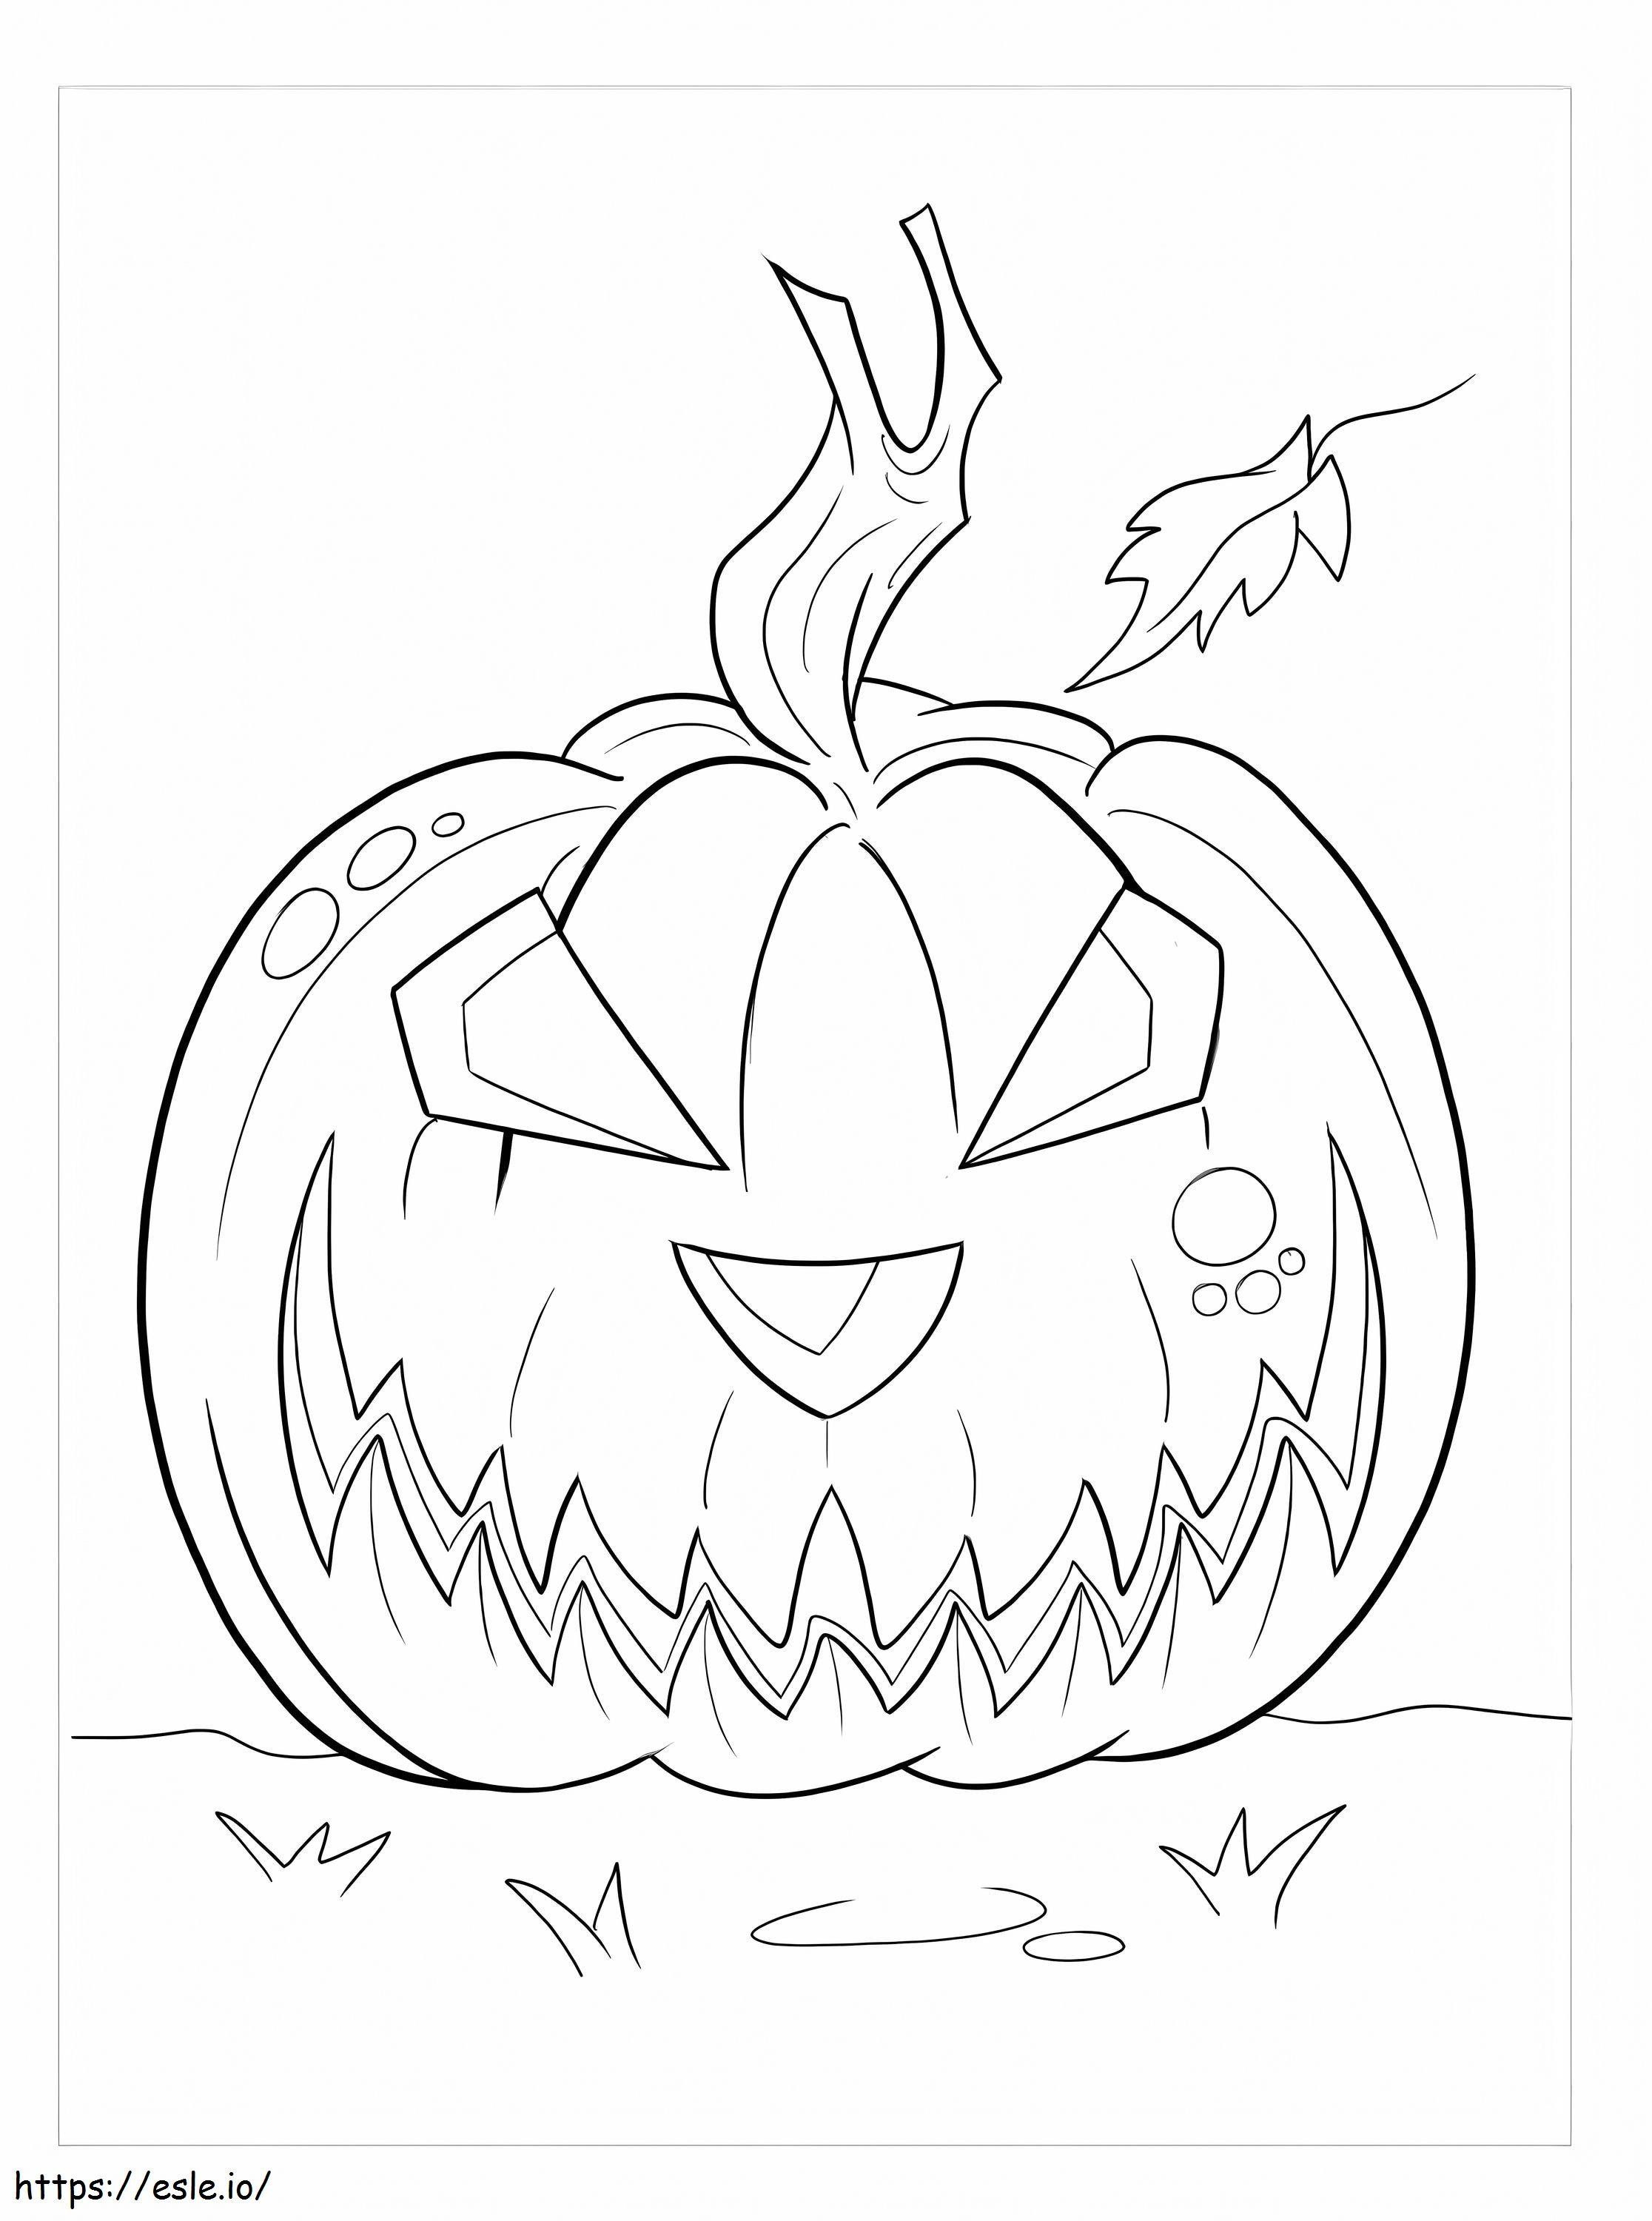 Ghost Pumpkin coloring page